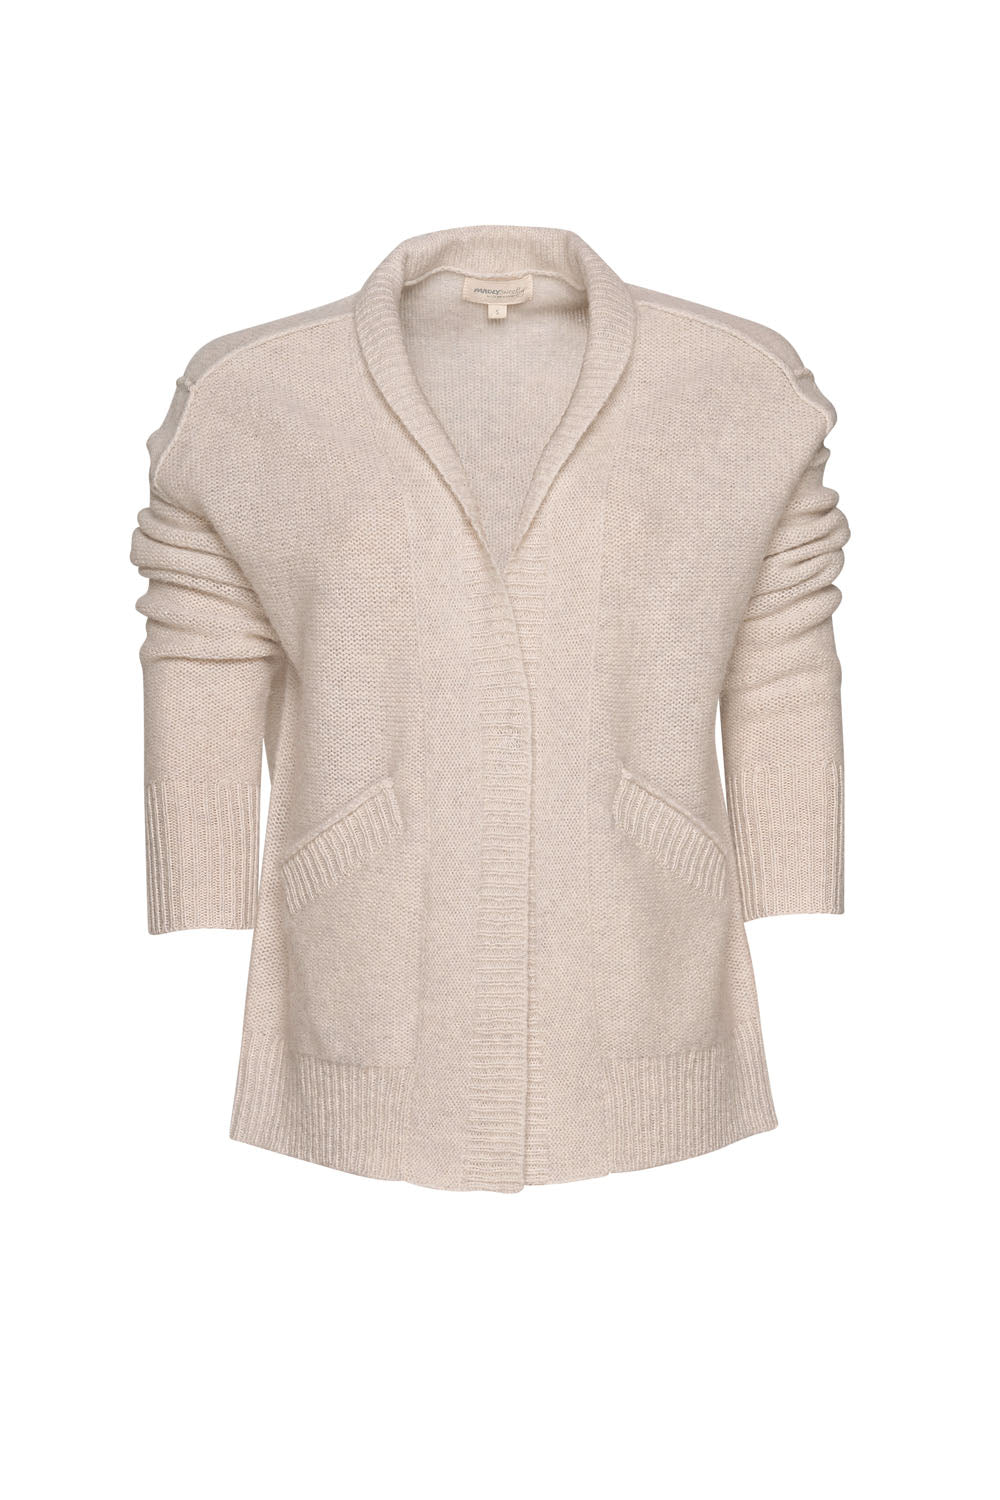 MADLY SWEETLY HUTCH CARDI - ECRU - THE VOGUE STORE